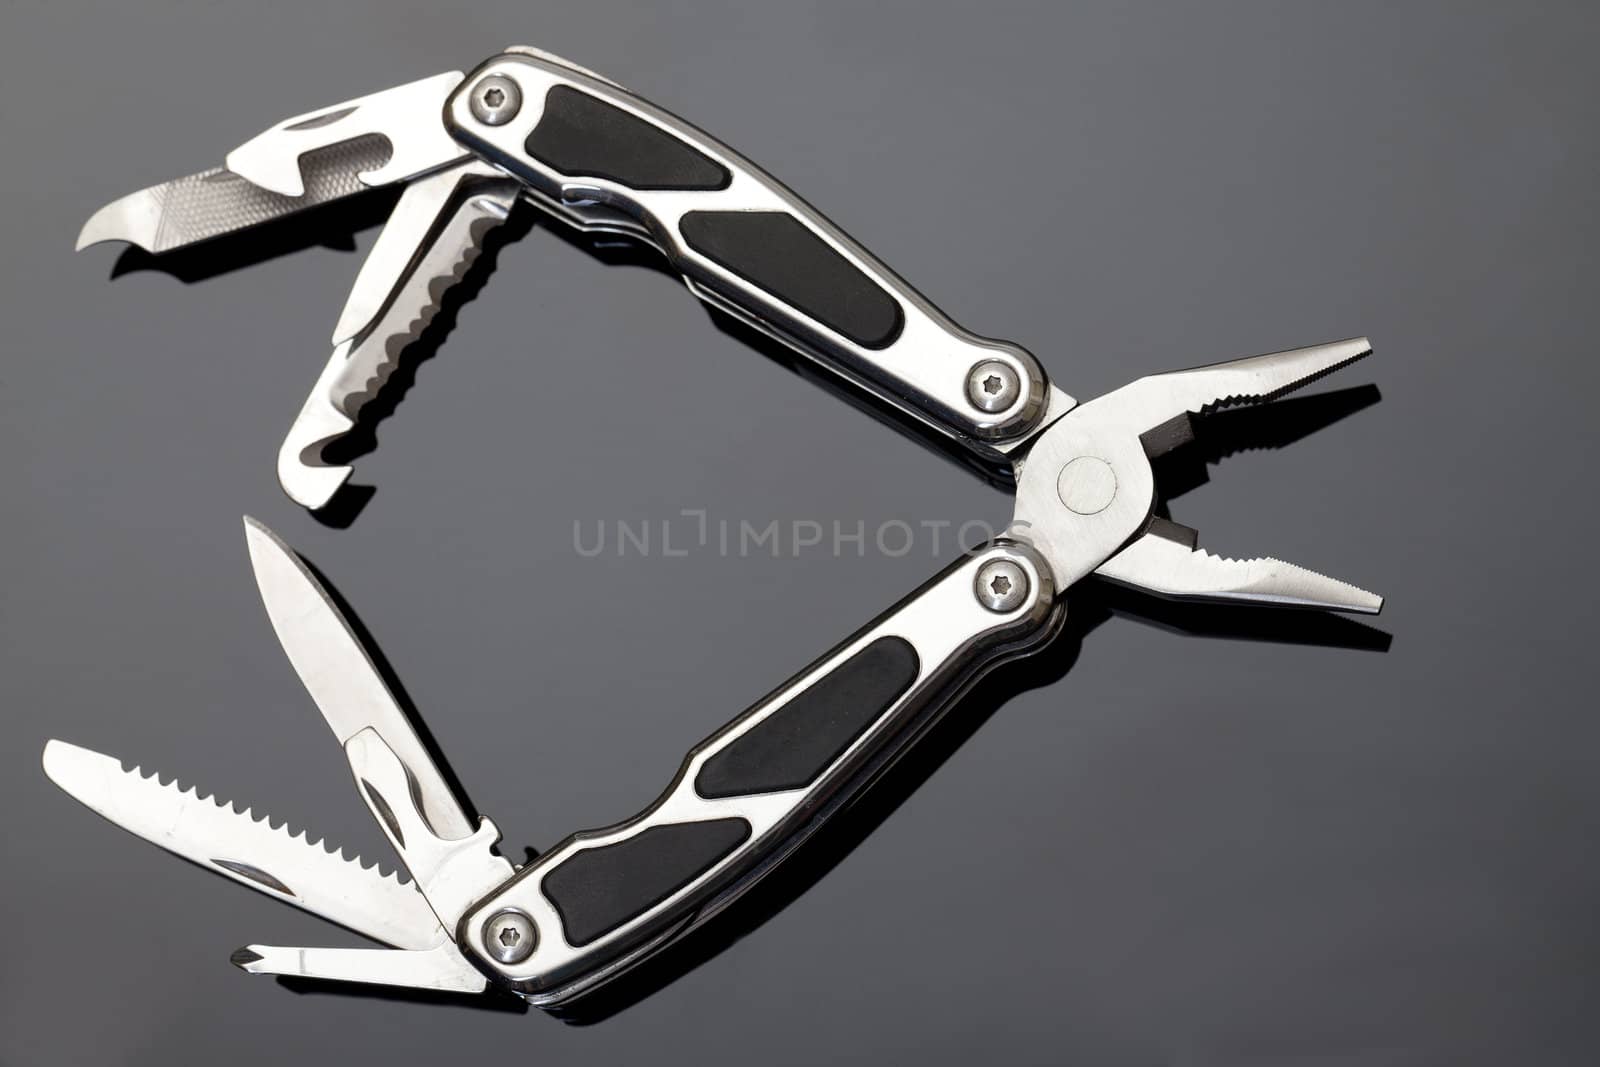 Steel pliers folding multi tool opened by Discovod